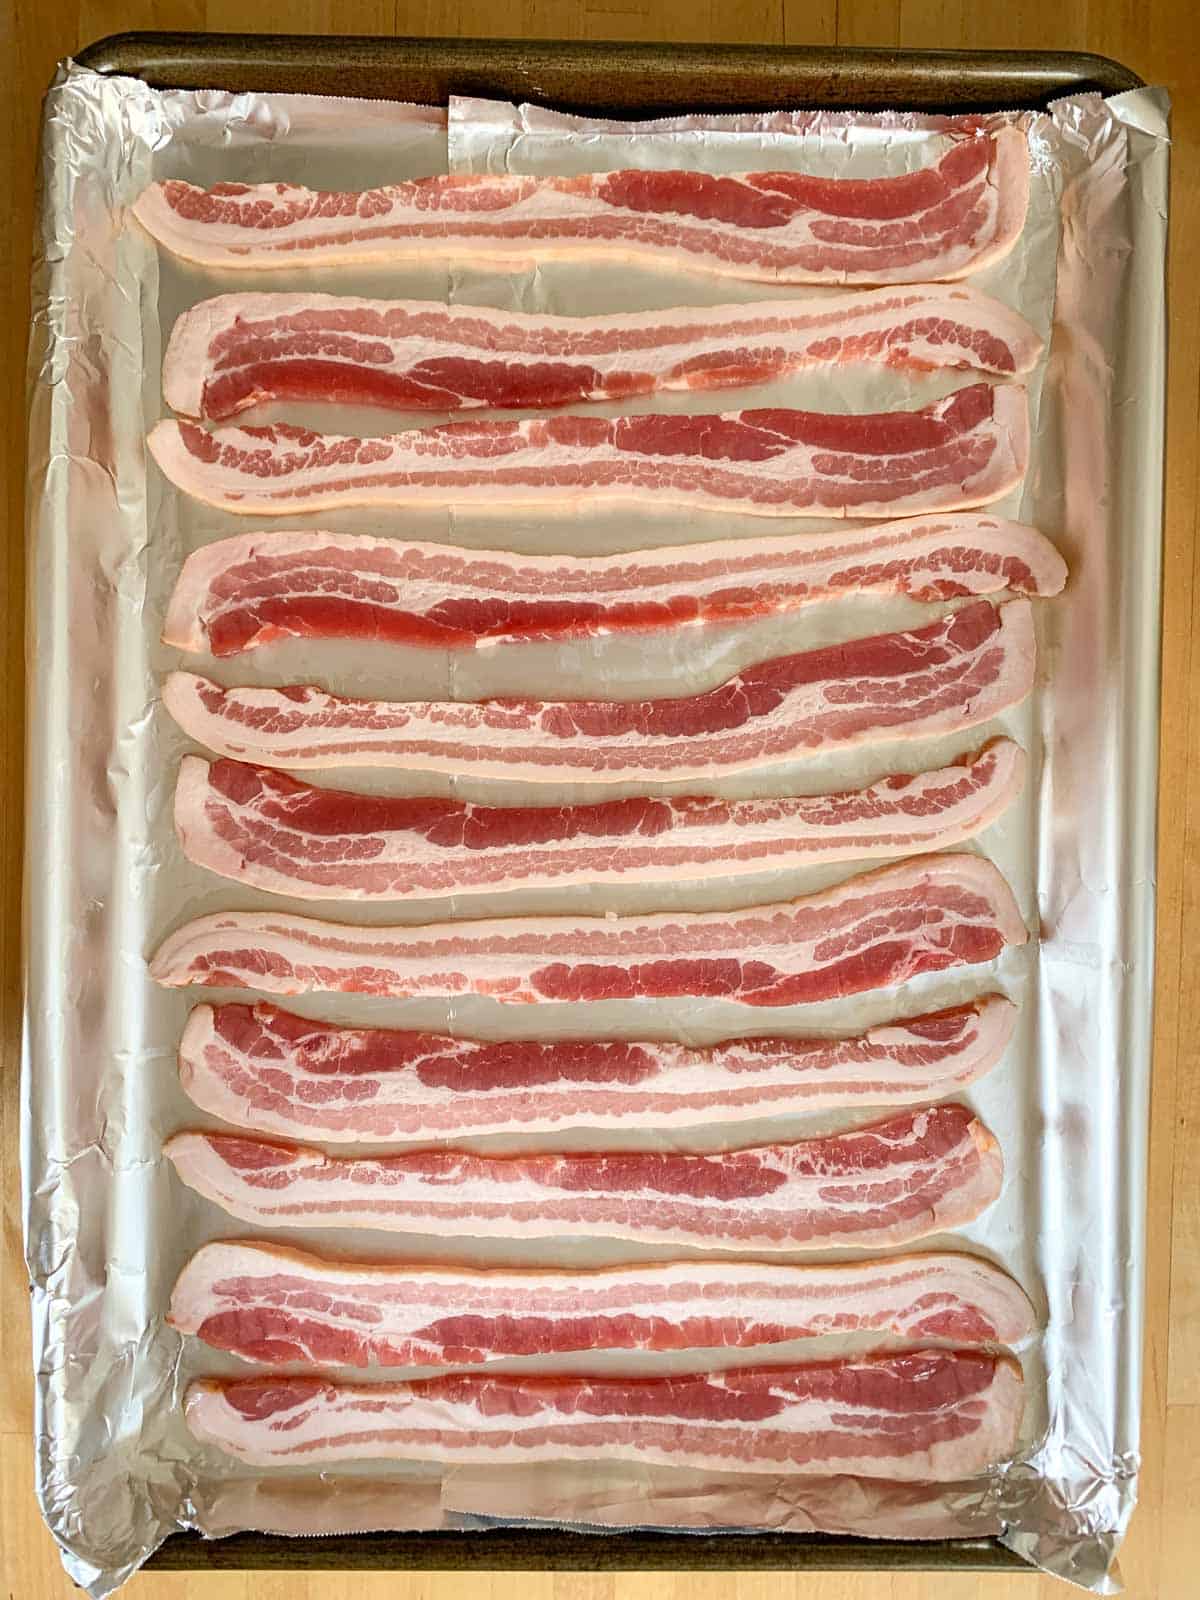 https://www.stetted.com/wp-content/uploads/2022/01/How-to-Bake-Bacon-Process-3.jpg